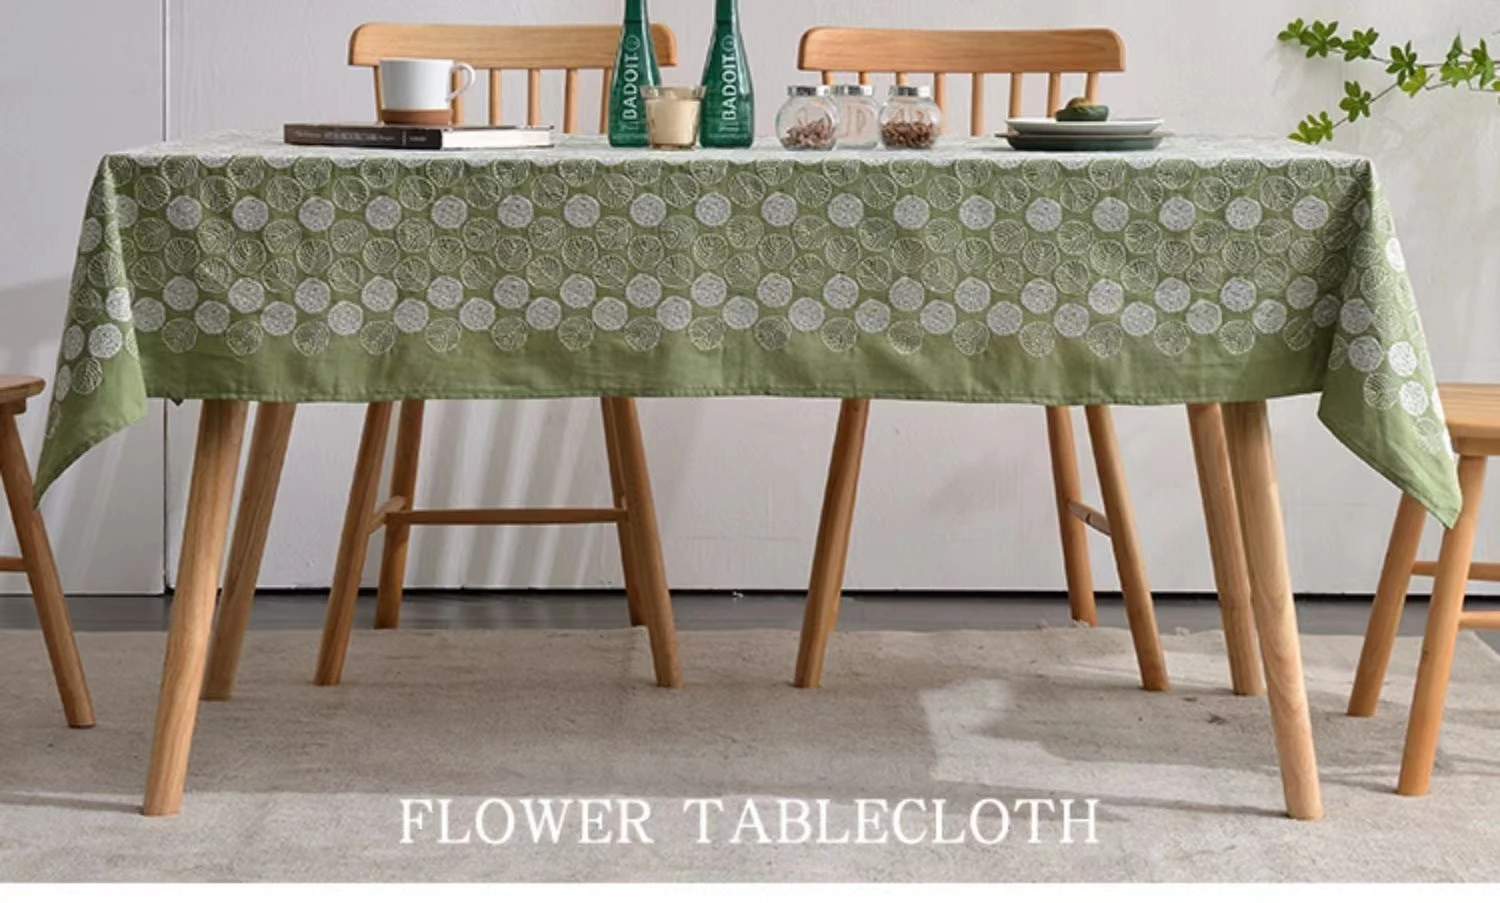 

Ramie embroidered tablecloth high sense Japanese INS wind small fresh round table cloth tea table cloth rectangular table cloth